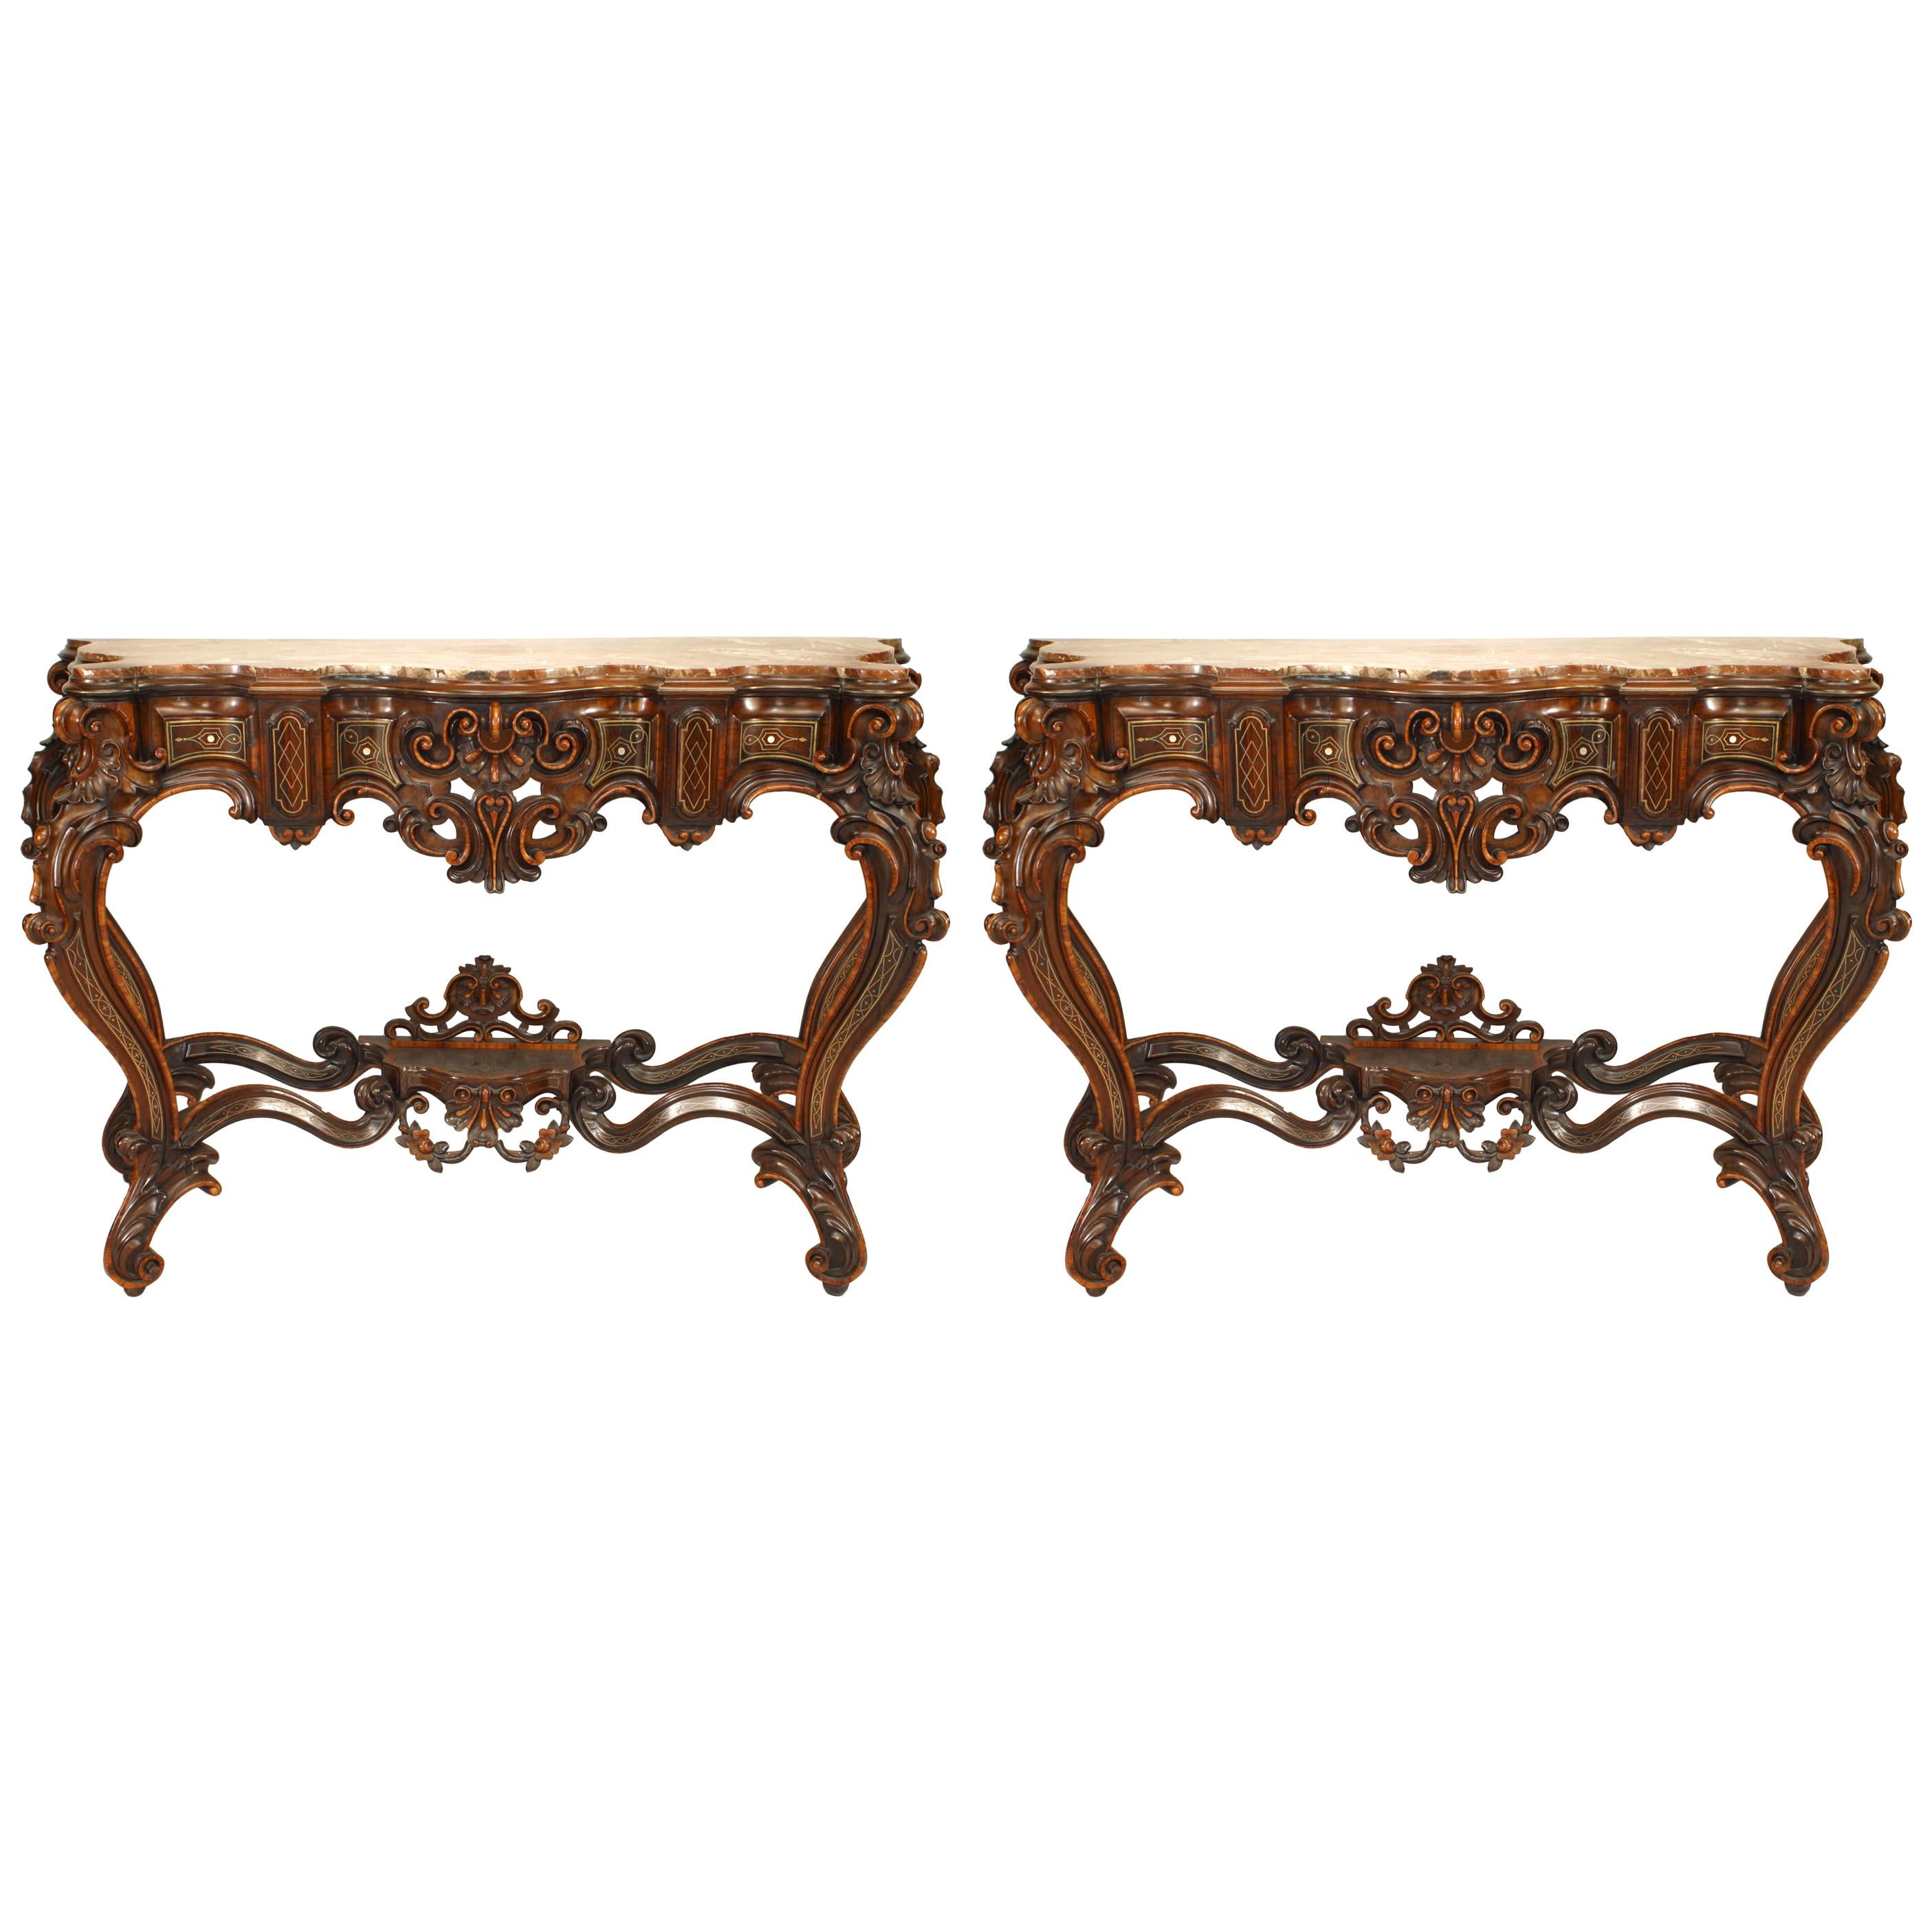 Pair of Italian Rococo Rosewood Marble Top Console Tables (Manner of Gotti) For Sale